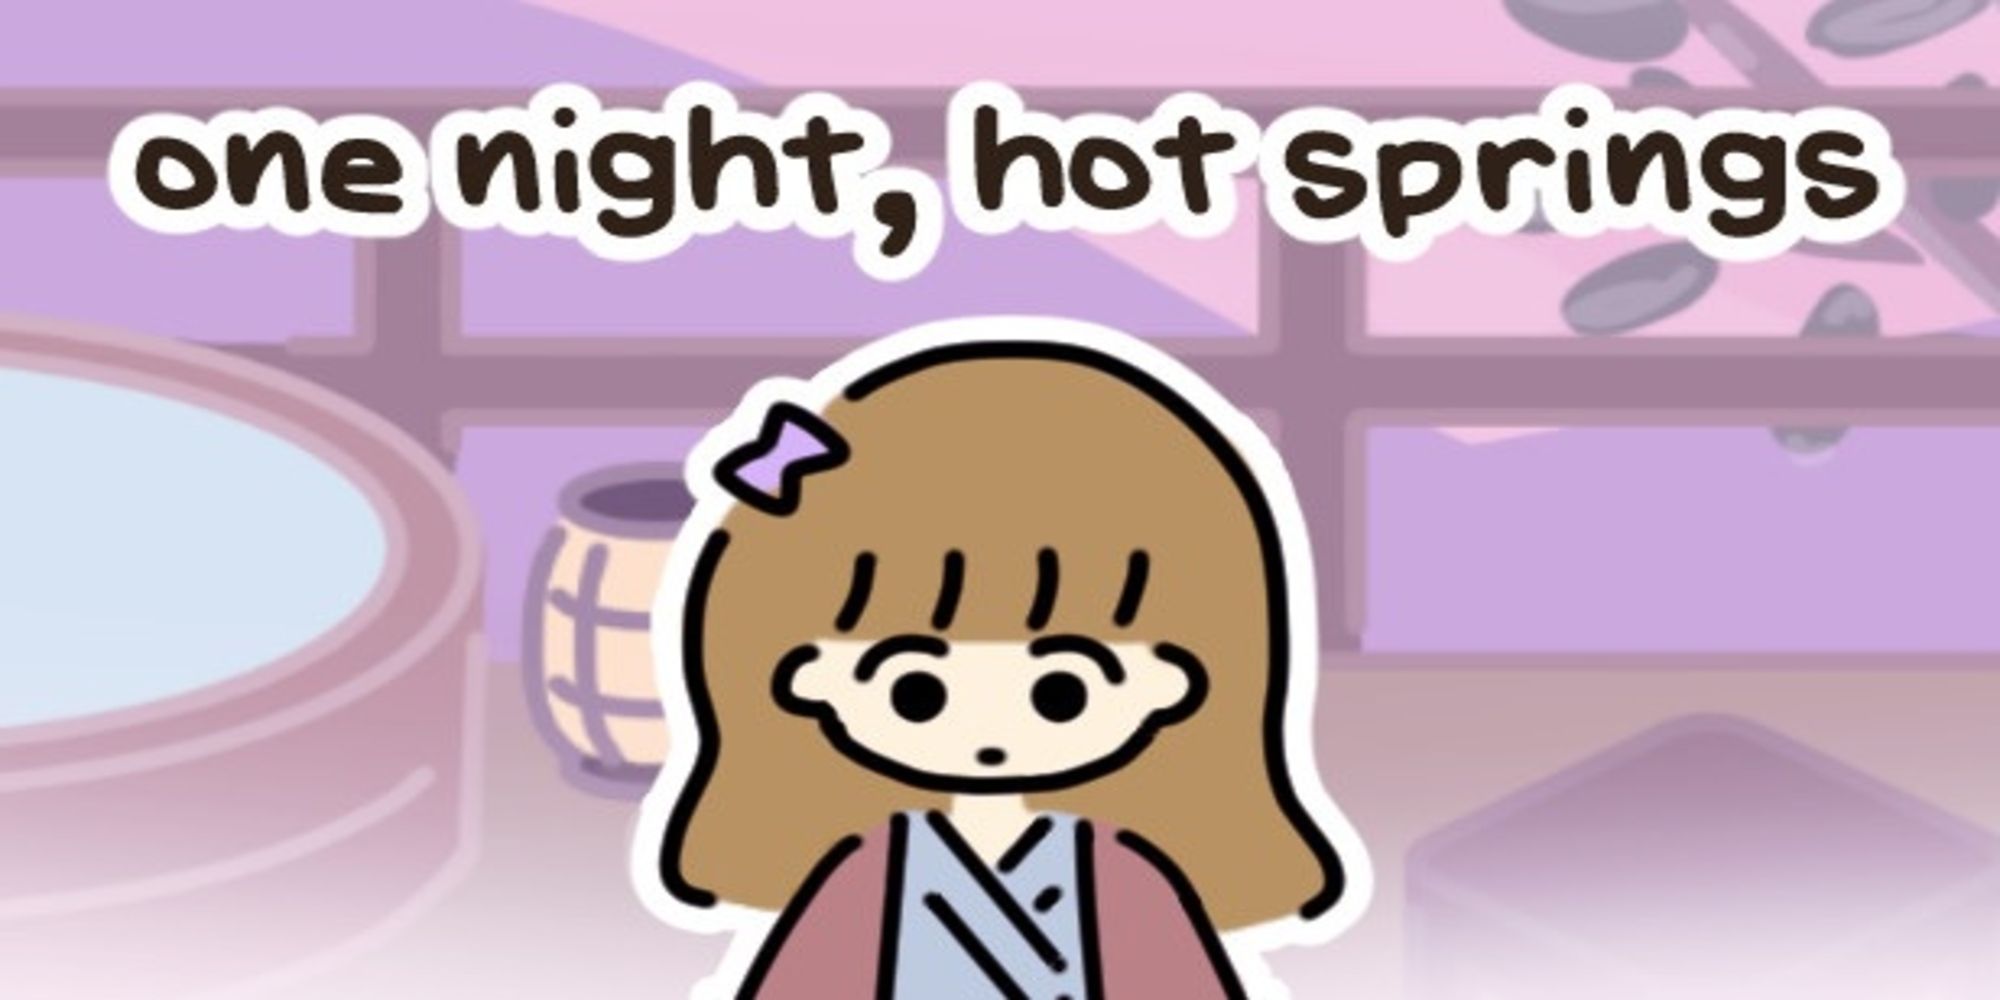 A promotional image for the game one night, hot springs